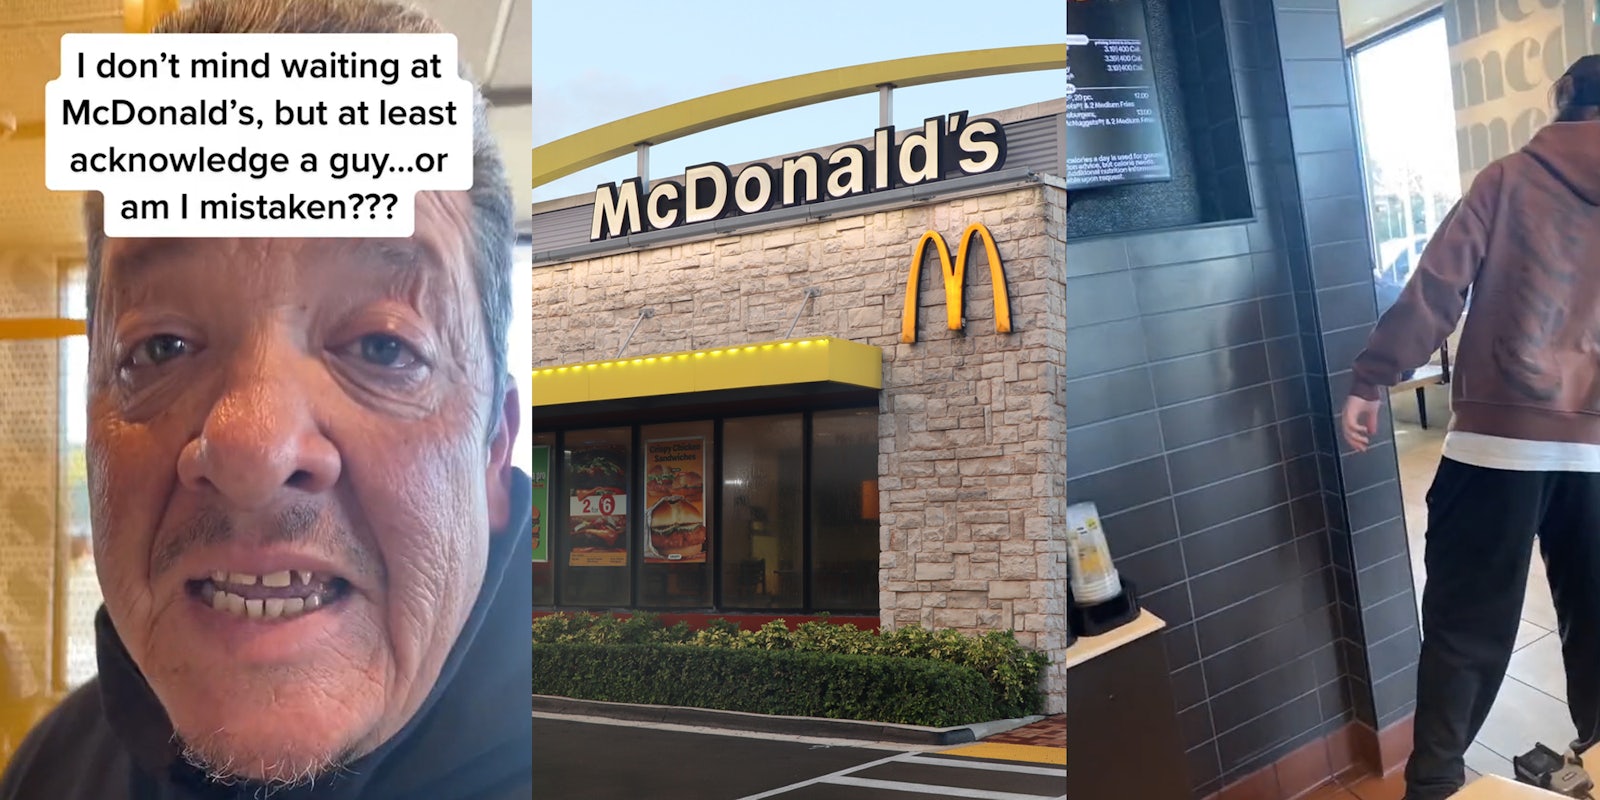 man inside McDonald's speaking with caption 'I don't mind waiting at McDonald's, but at least acknowledge a guy... or am I mistaken?' (l) McDonald's building with sign (c) McDonald's employee with back turned to camera (r)